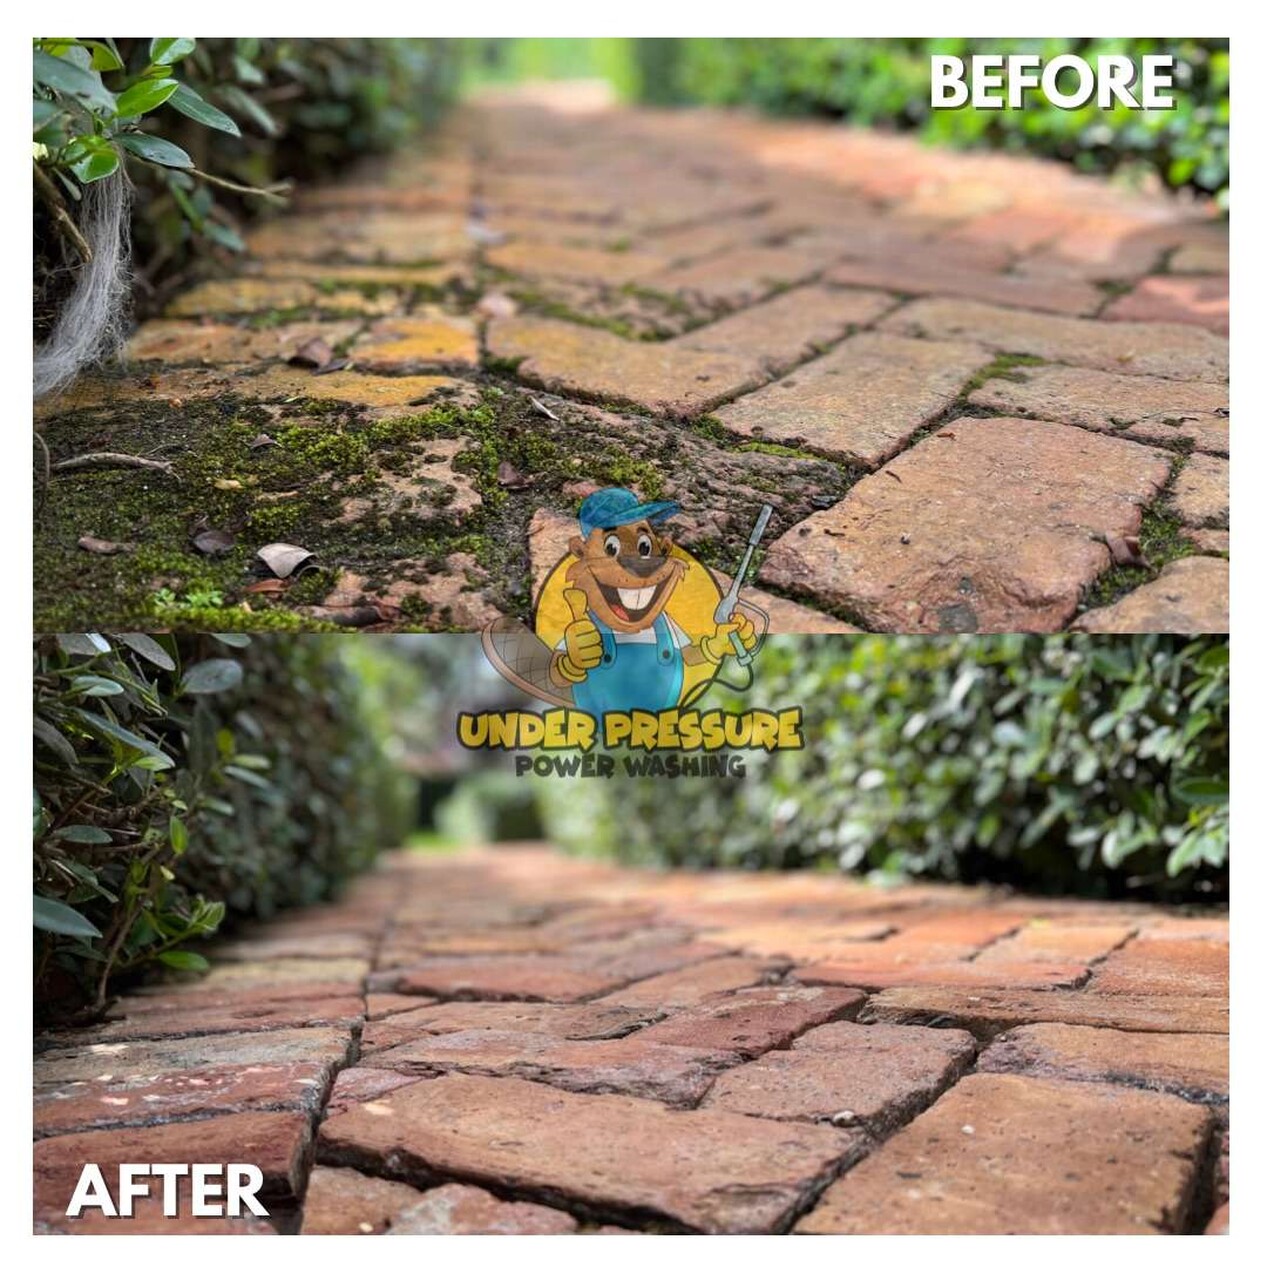 Residential Driveway Cleaning